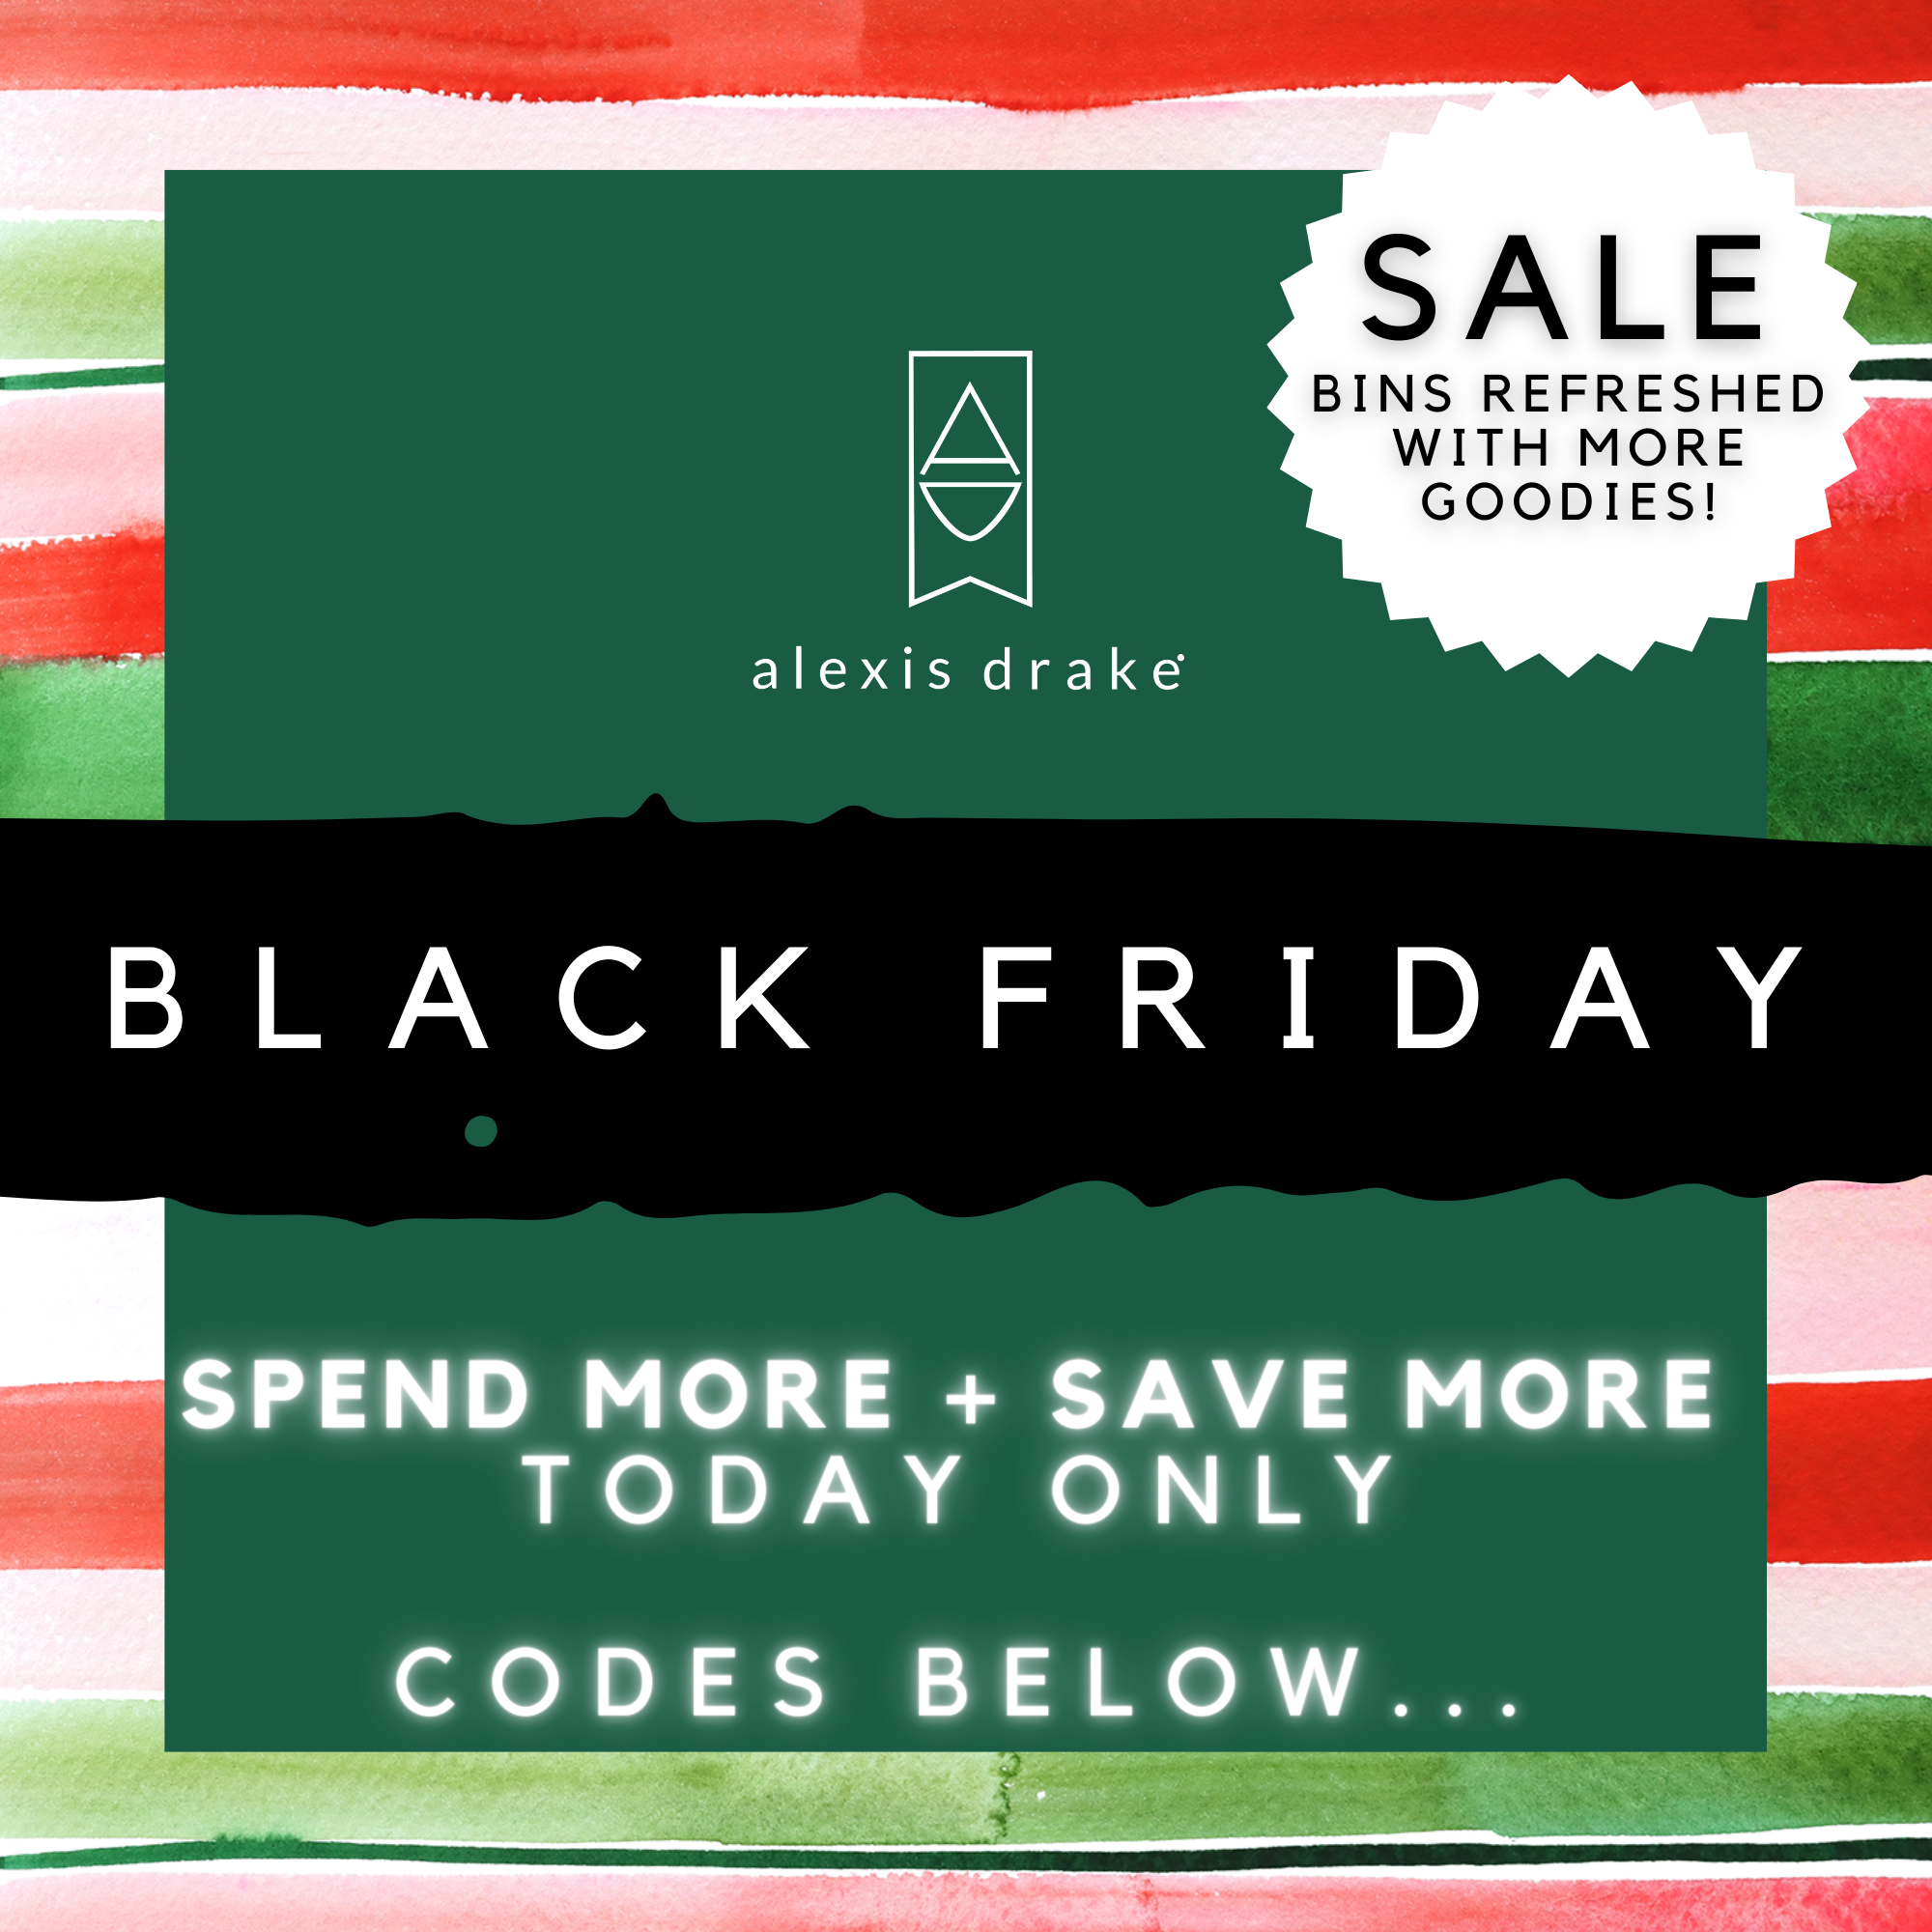 BLACK FRIDAY ----> BUY MORE + SAVE MORE